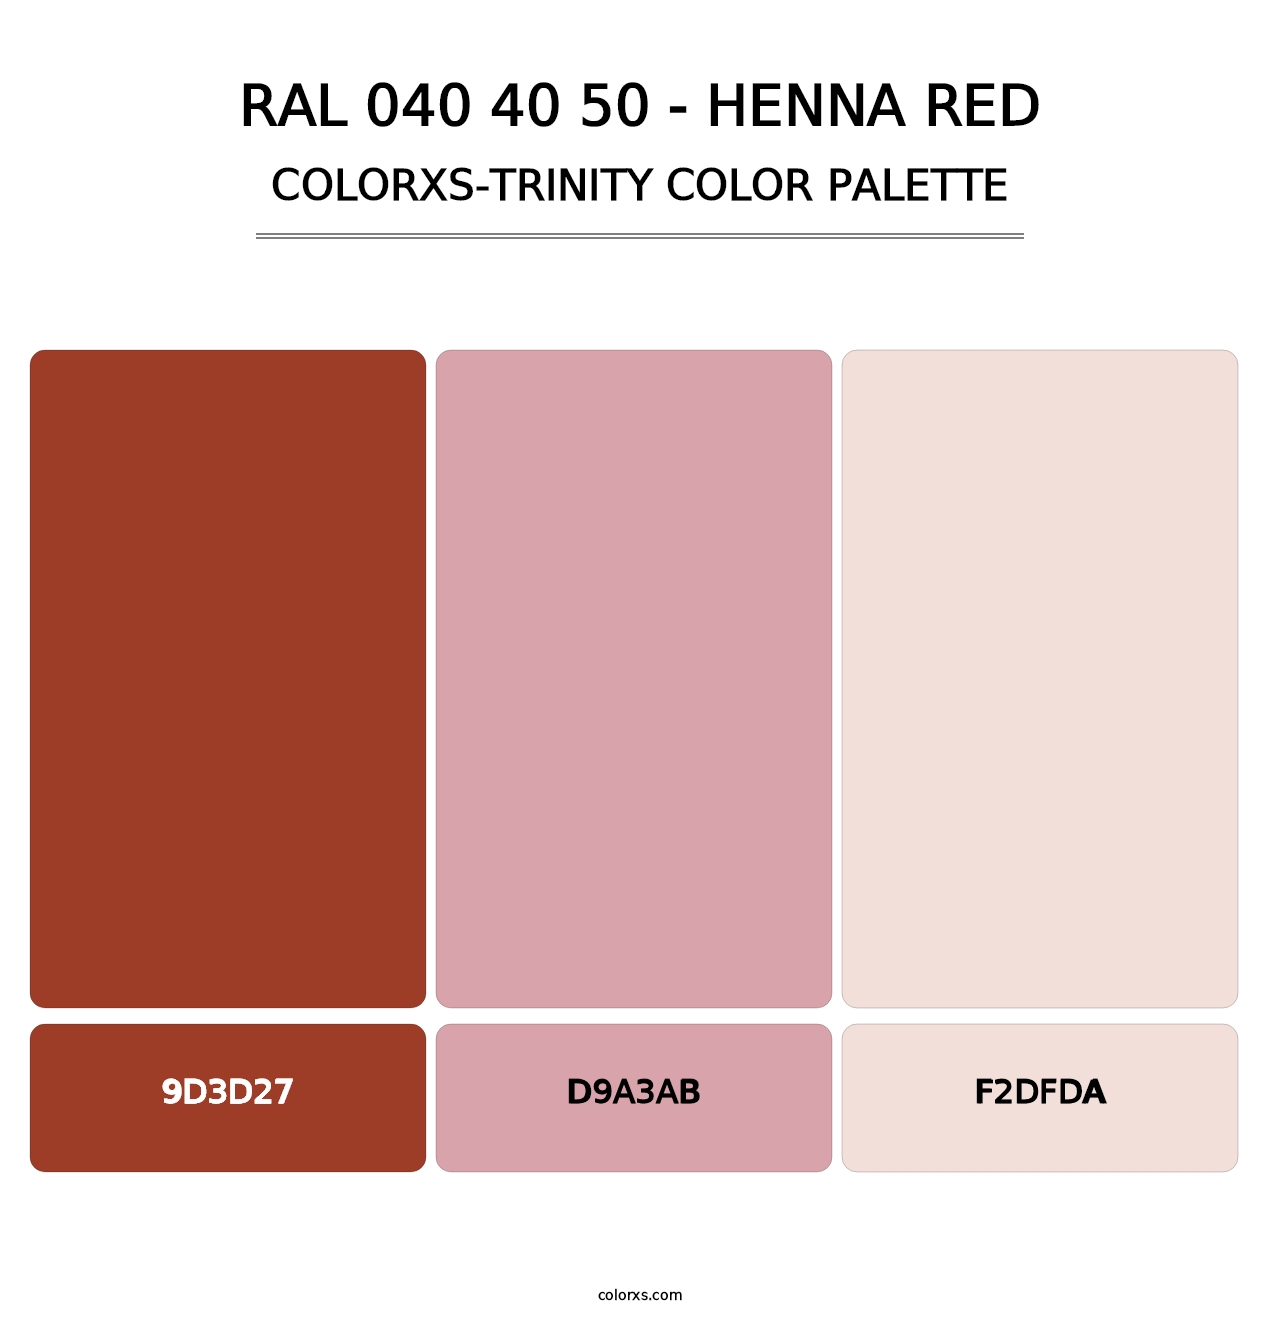 RAL 040 40 50 - Henna Red - Colorxs Trinity Palette